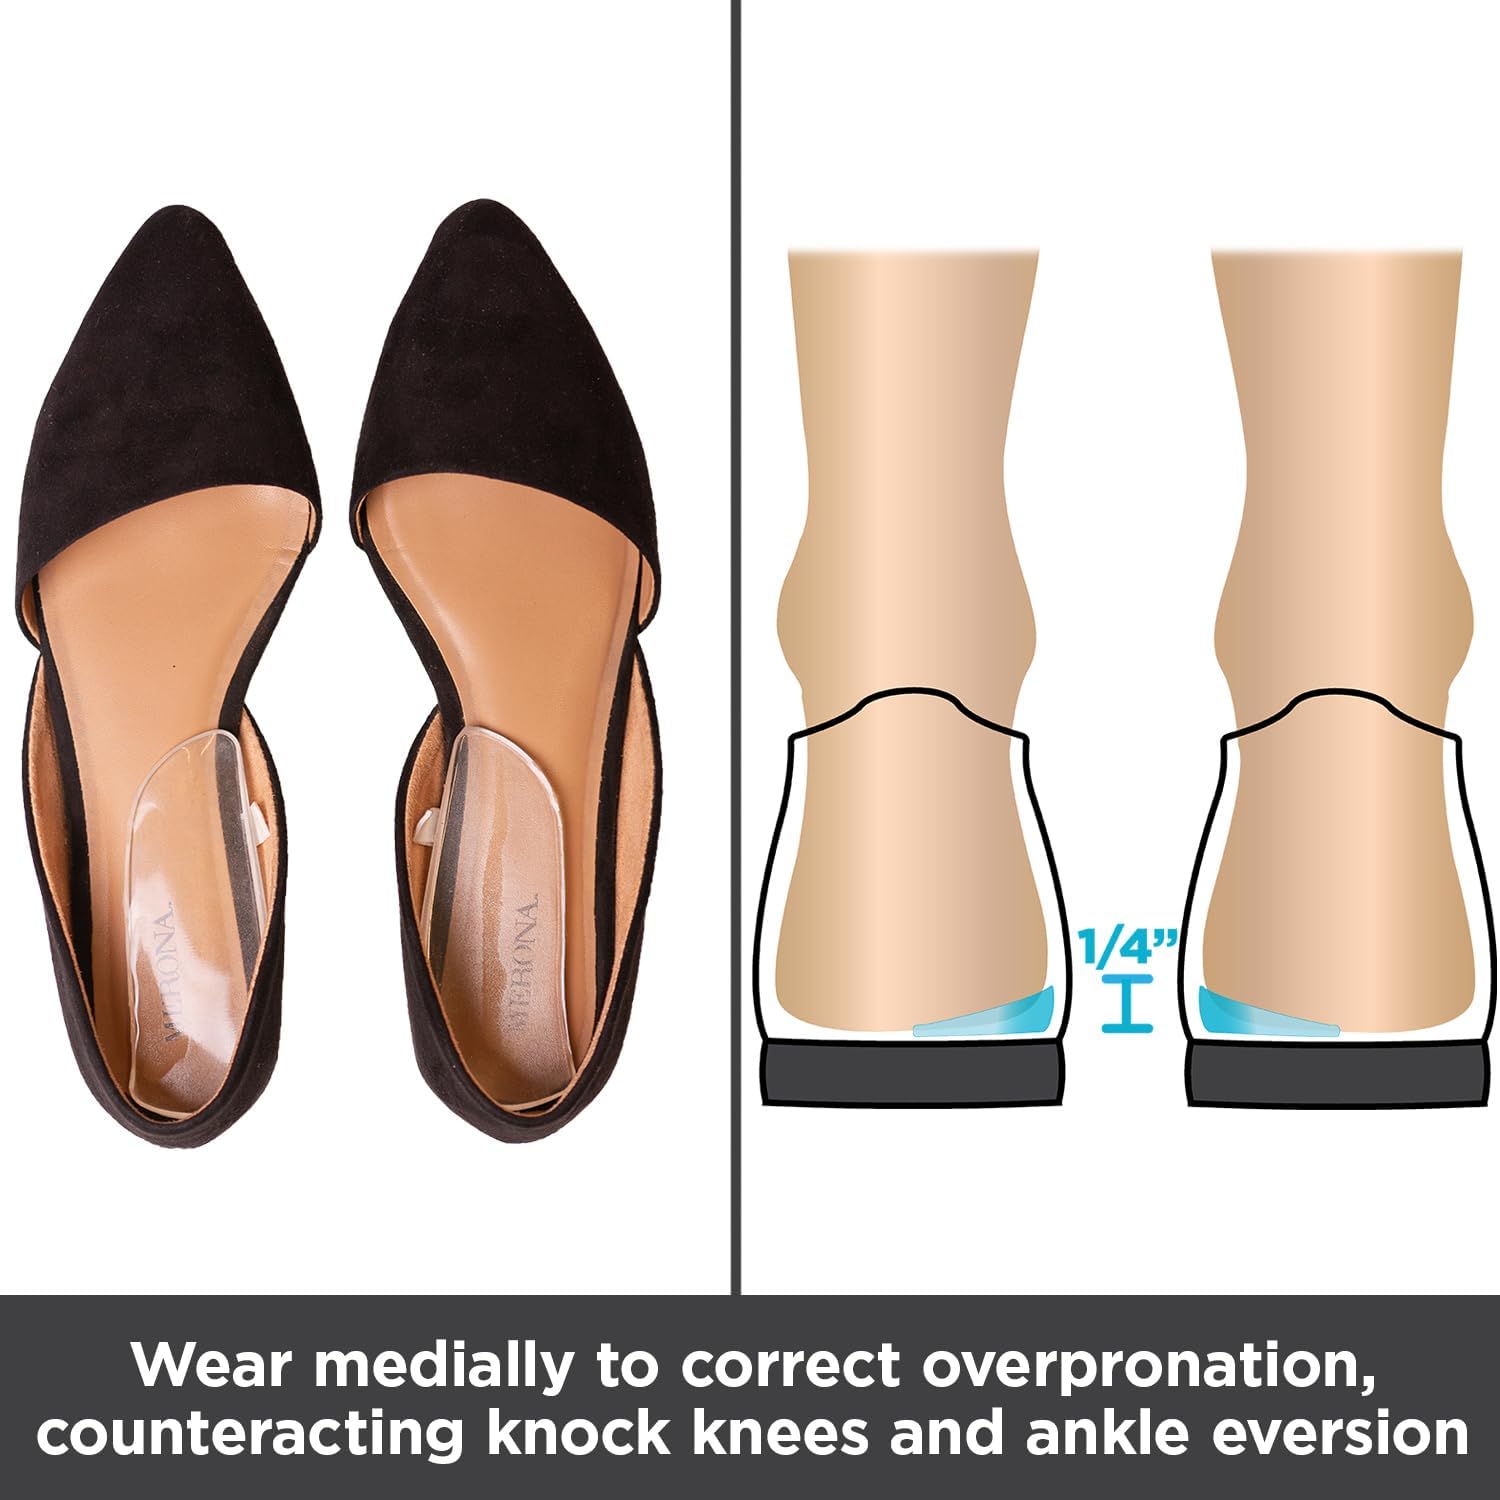 BraceAbility Medial Lateral Heel Wedge Silicone Insoles (Pair) - Supination Pronation Corrective Adhesive Shoe Inserts for Foot Alignment, Knock Knee Pain, Bow Legs, Osteoarthritis